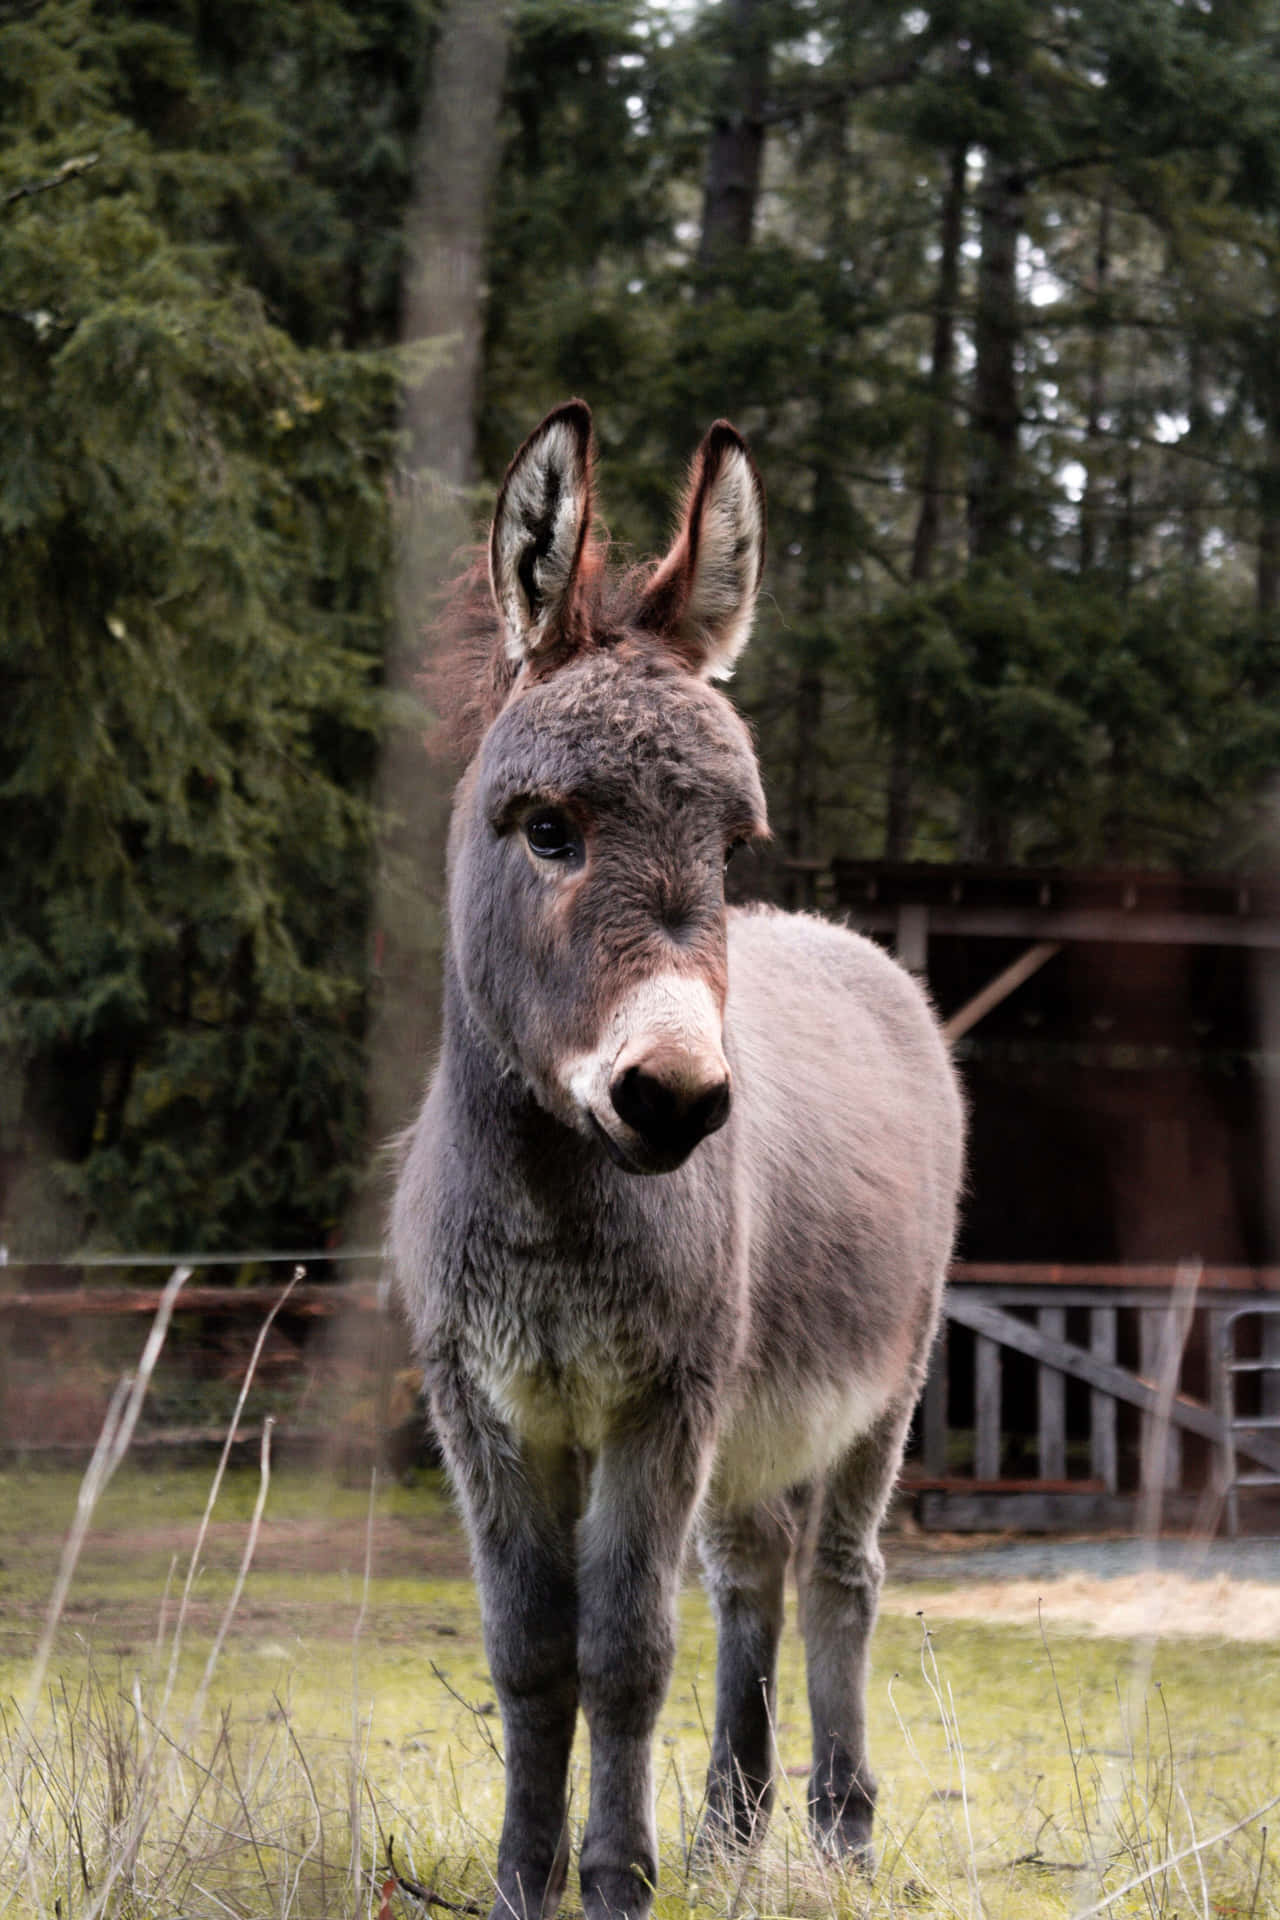 Get In The Groove with this Music-loving Donkey